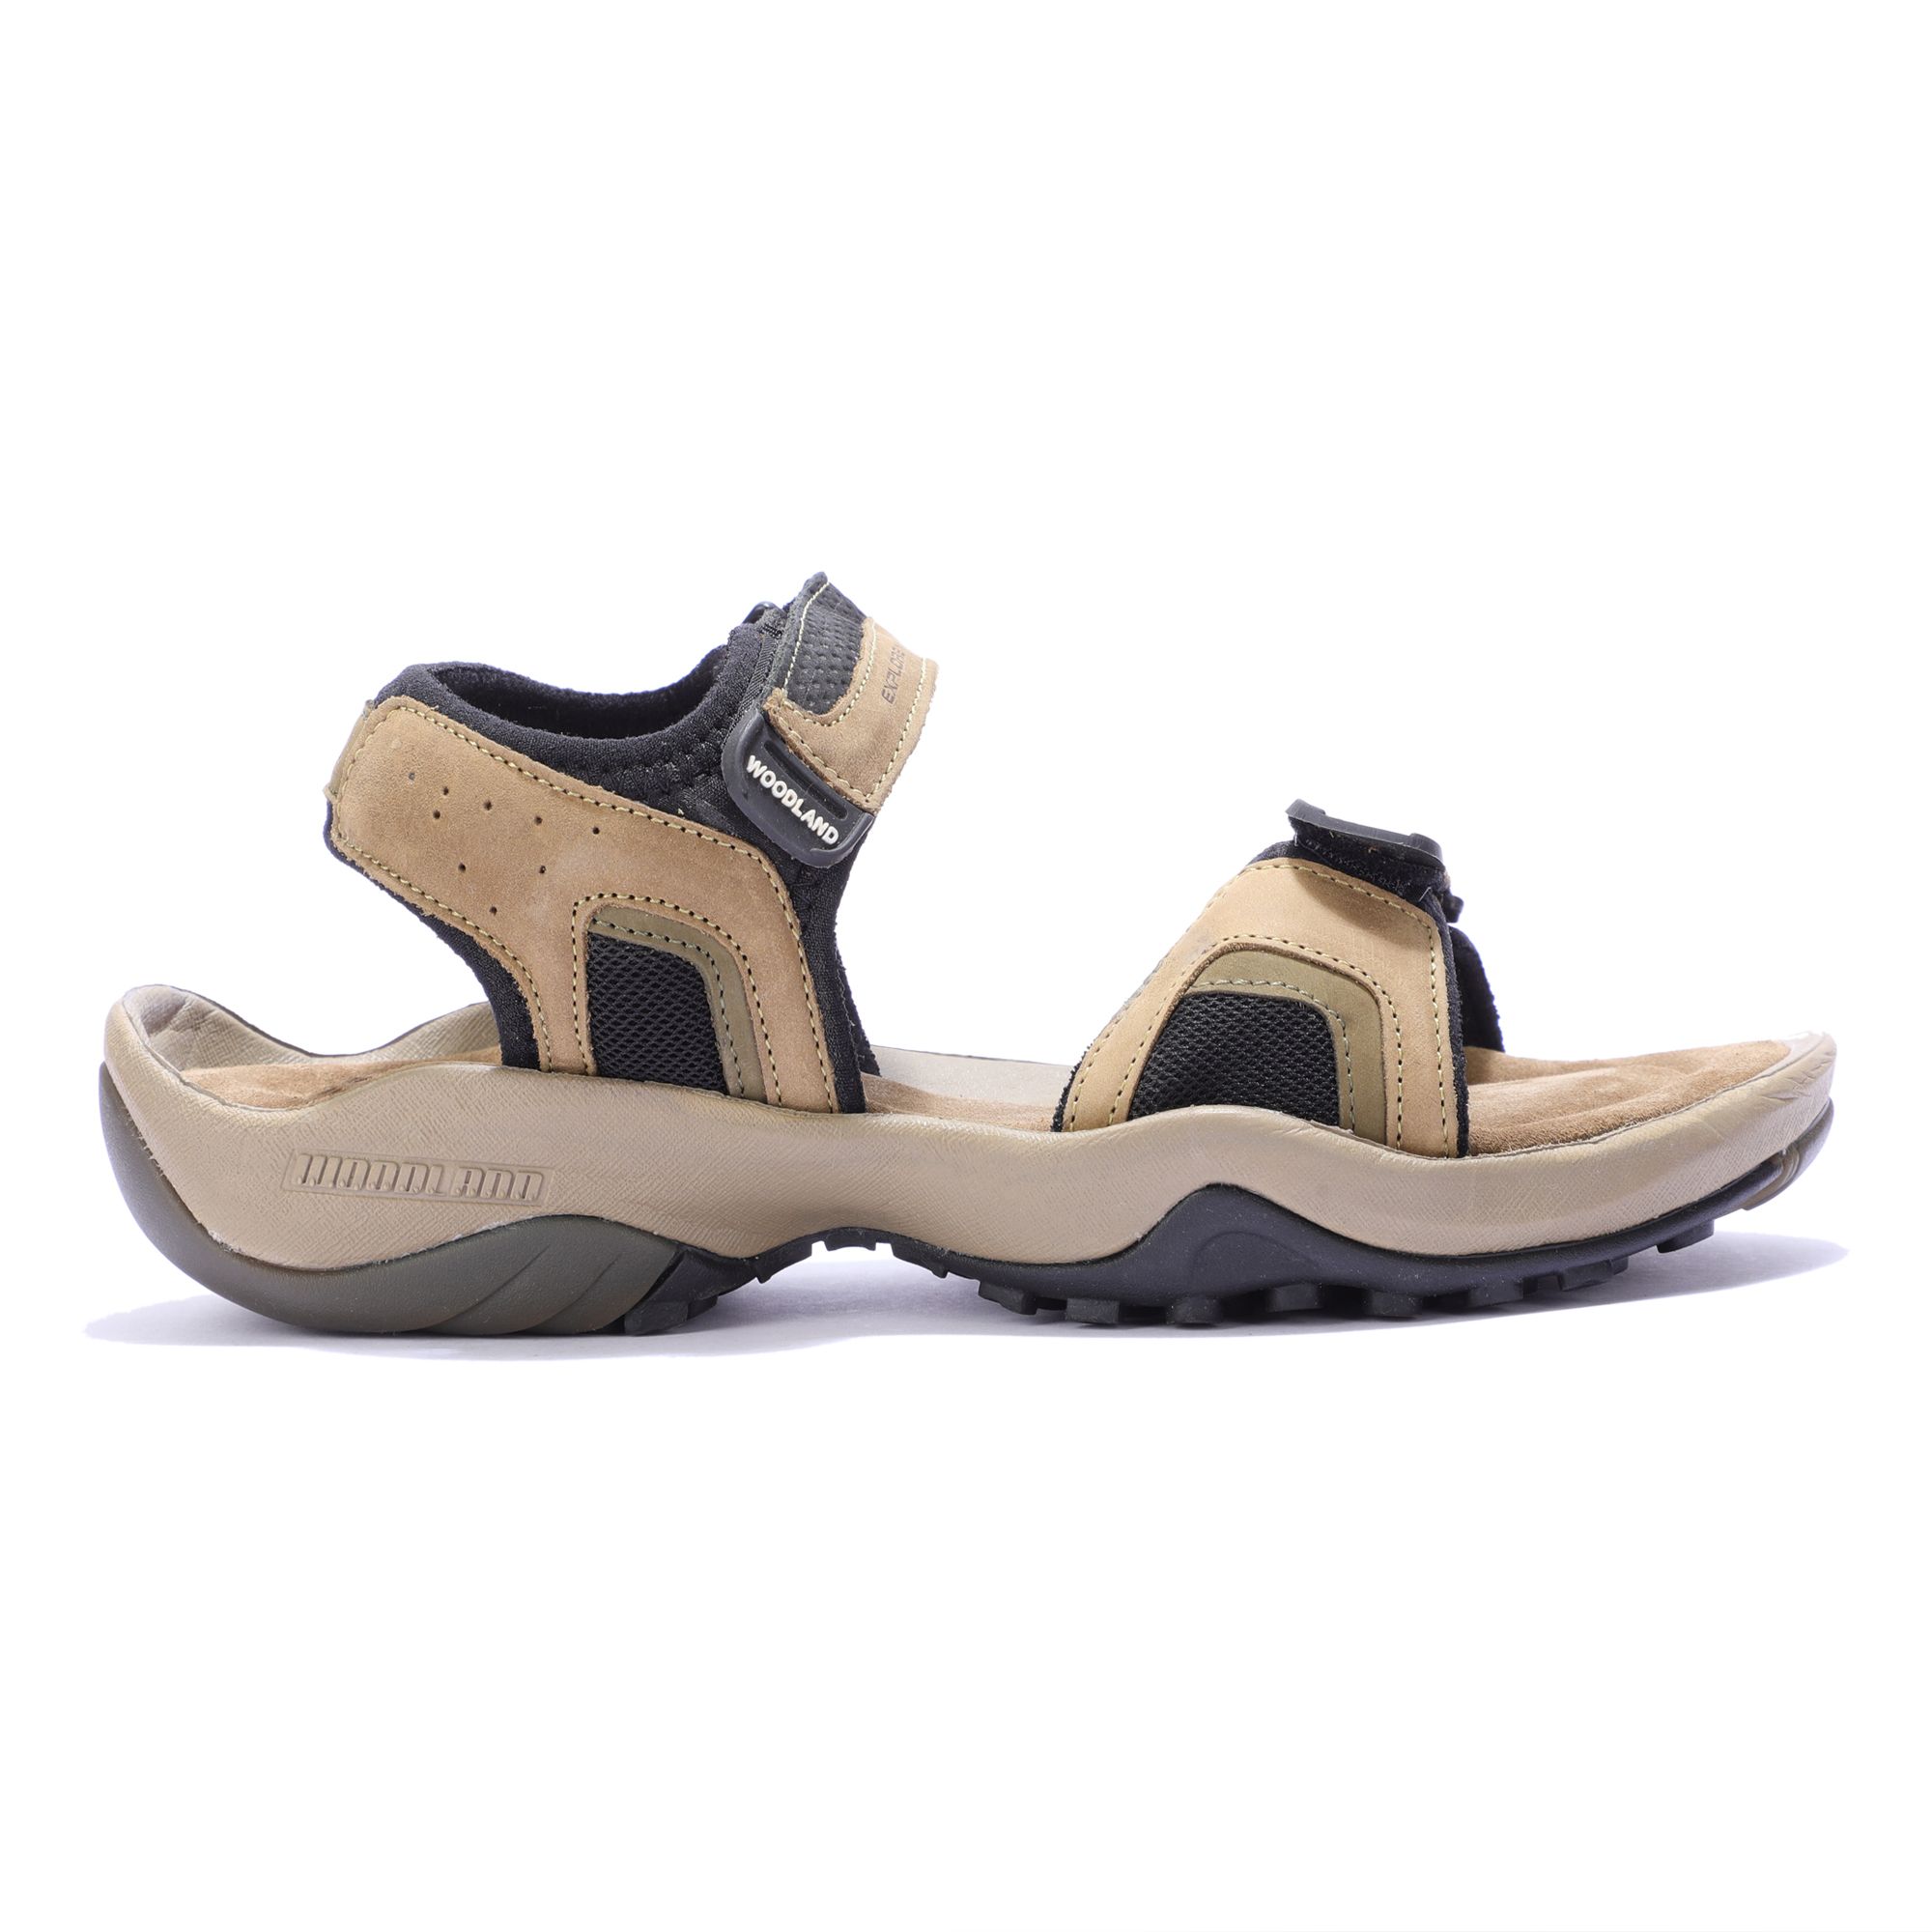 Buy Woodland Sandals For Men At Best Prices Online In India | Tata CLiQ-hkpdtq2012.edu.vn